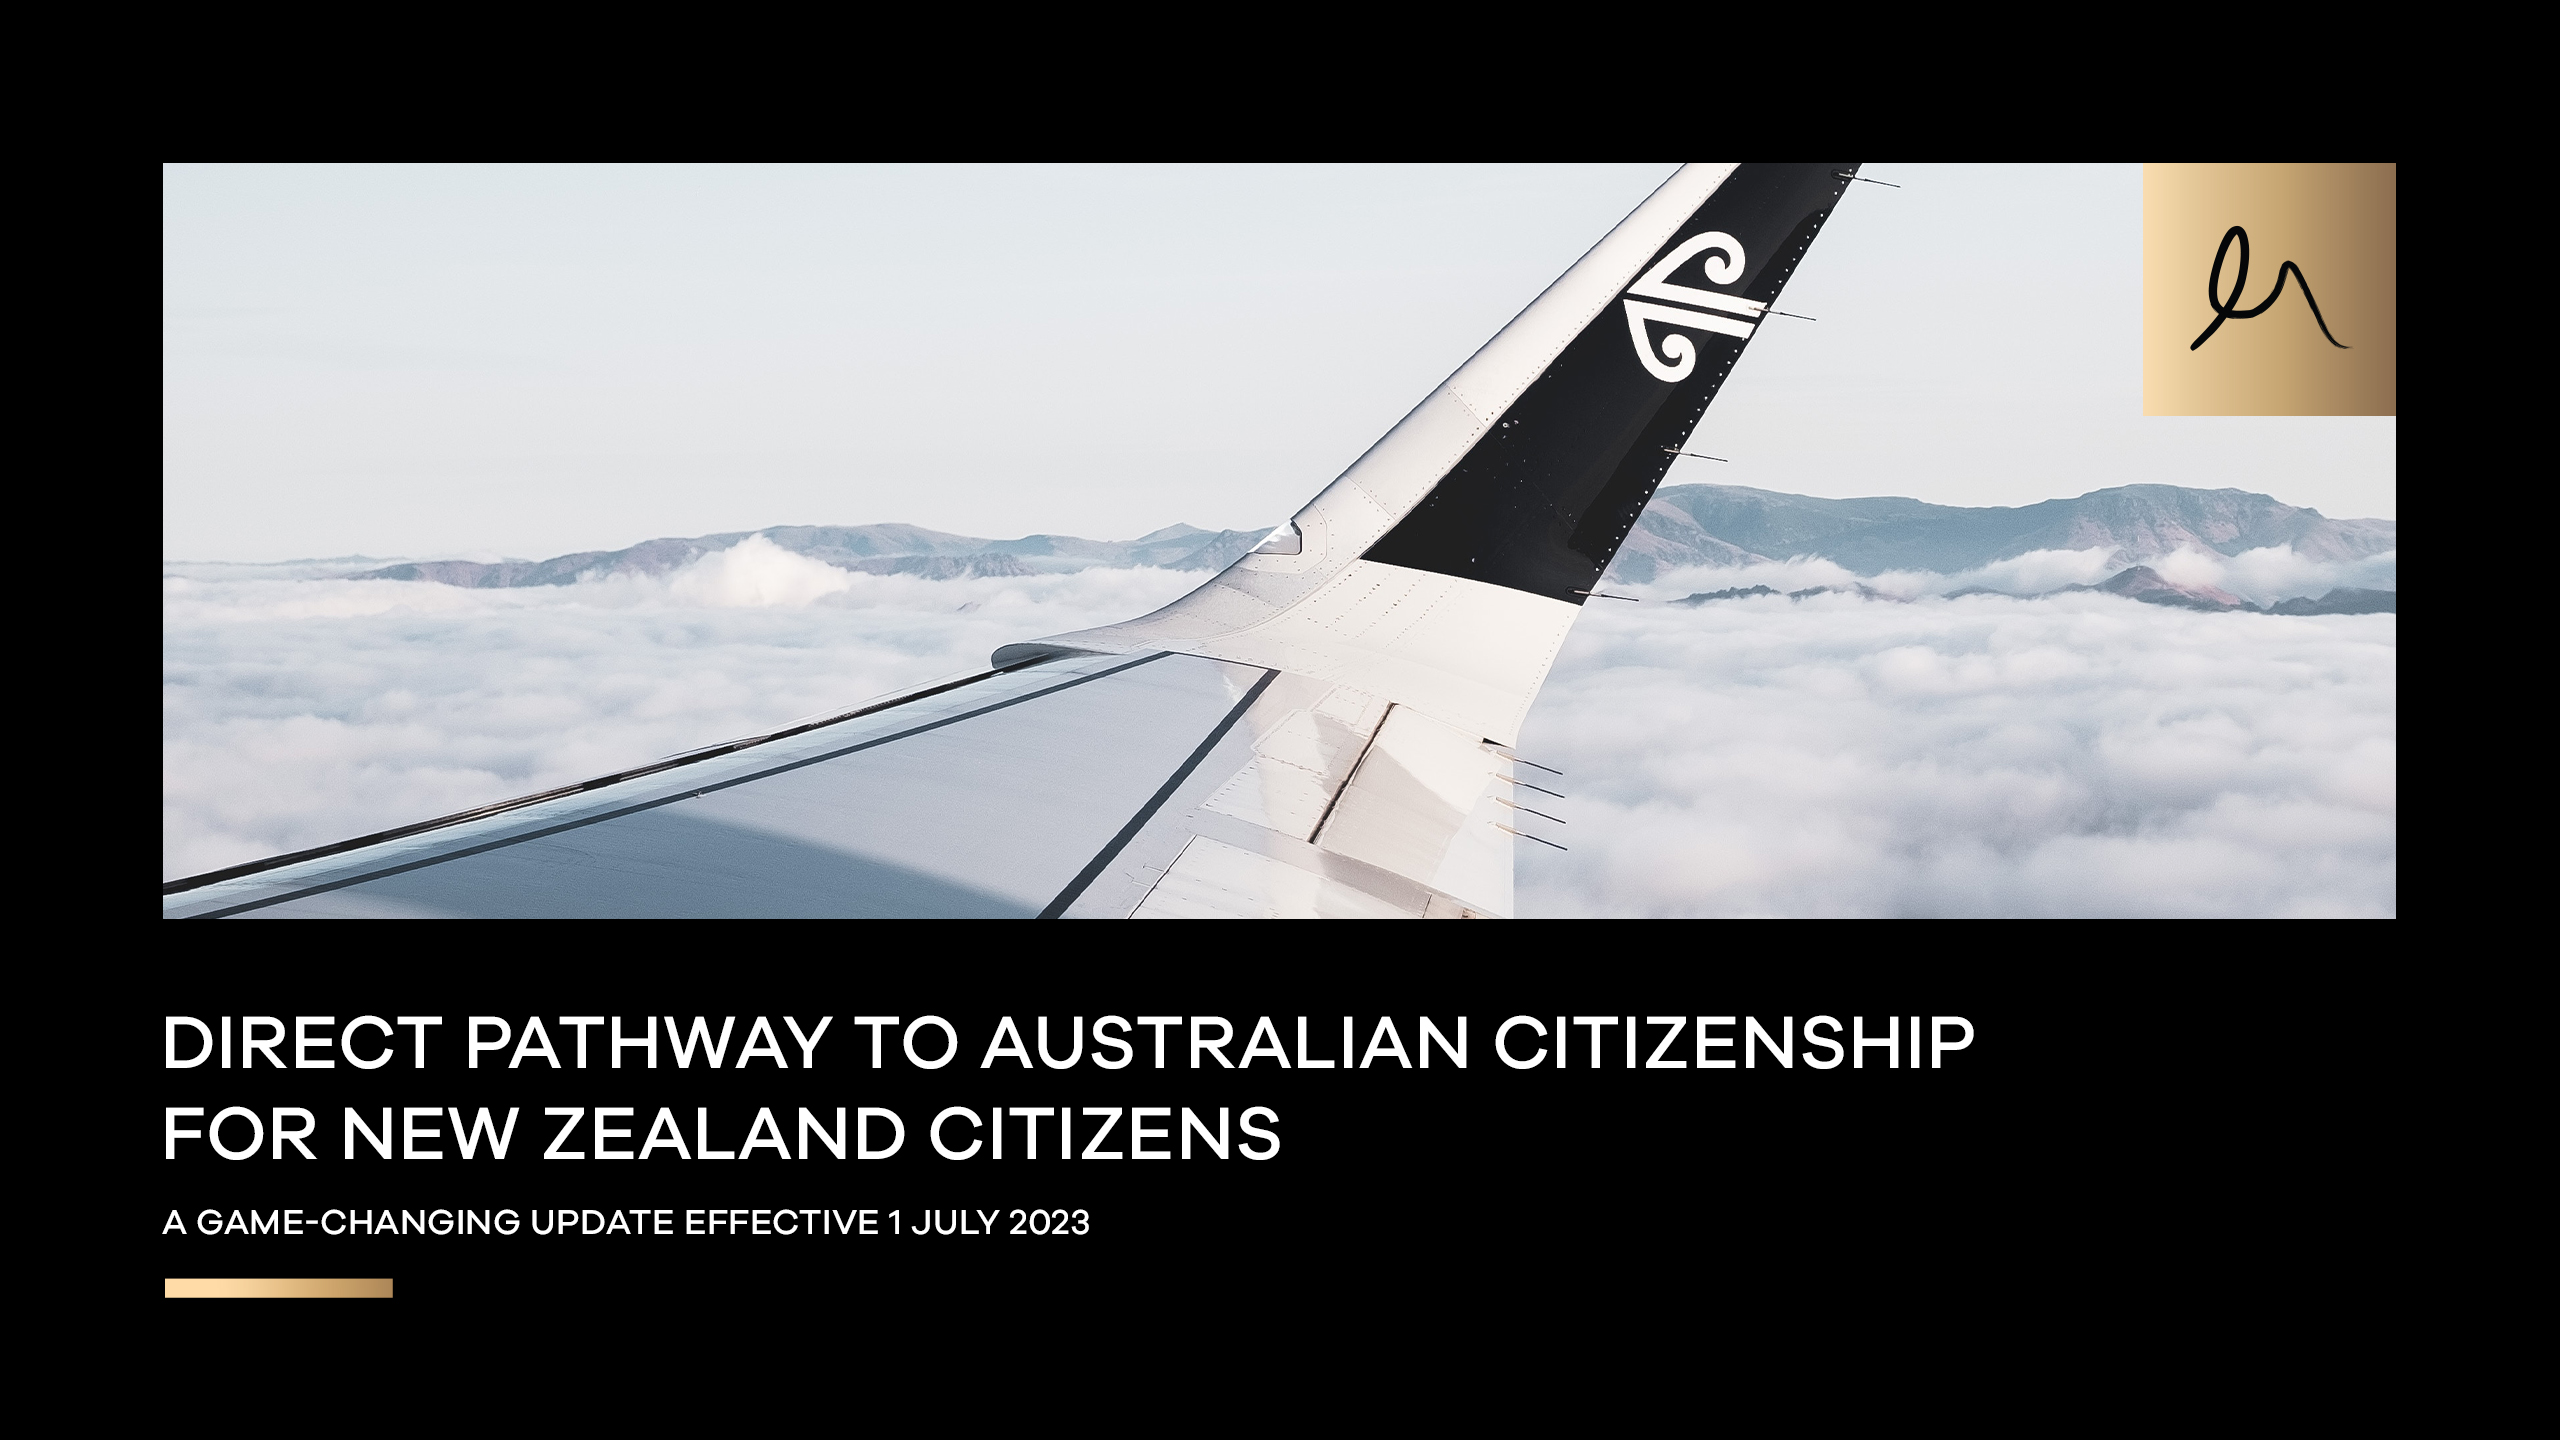 Direct Pathway to Australian Citizenship for New Zealand Citizens